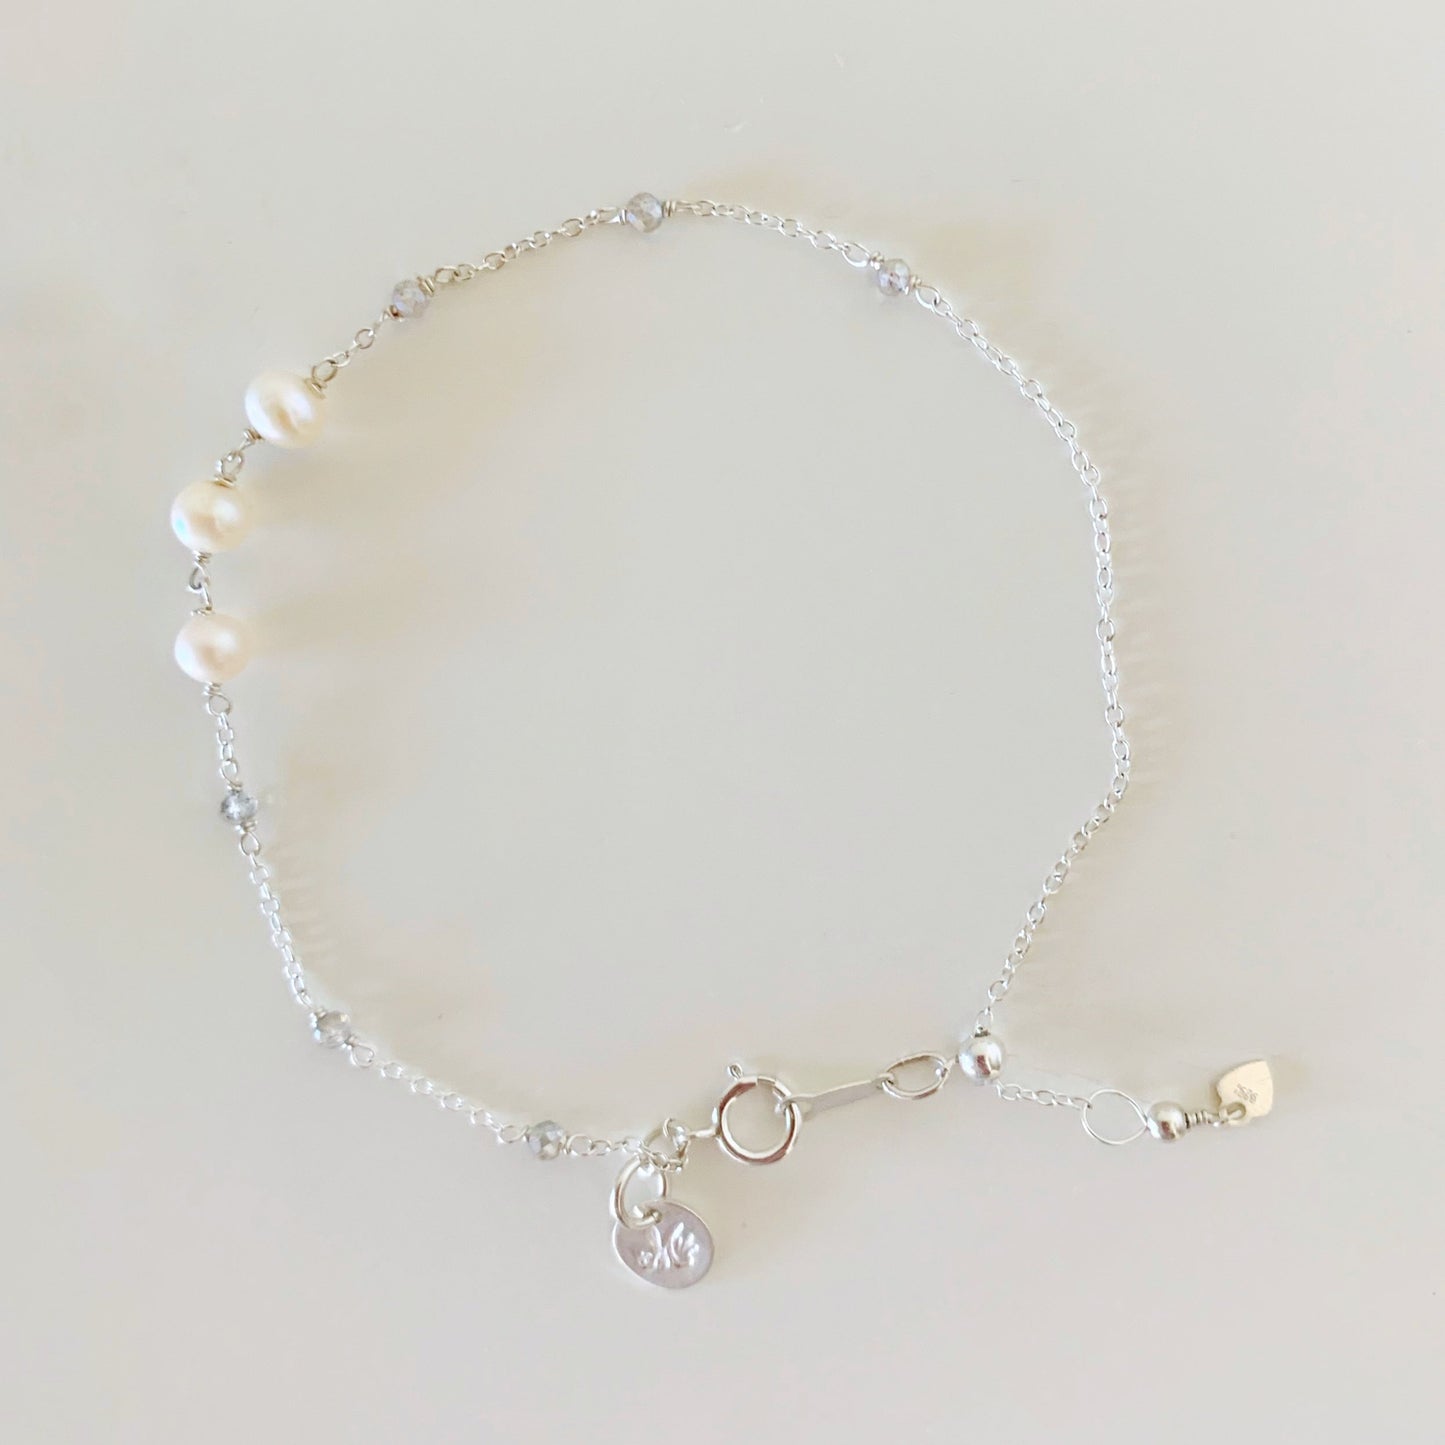 the westport bracelet by mermaids and madeleines is created with freshwater pearls and small labradorite gems hand wrapped on the chain. this adjustable bracelet has a silicone slide bead near the back at the clasp. the westport bracelet here is photographed on a white surface